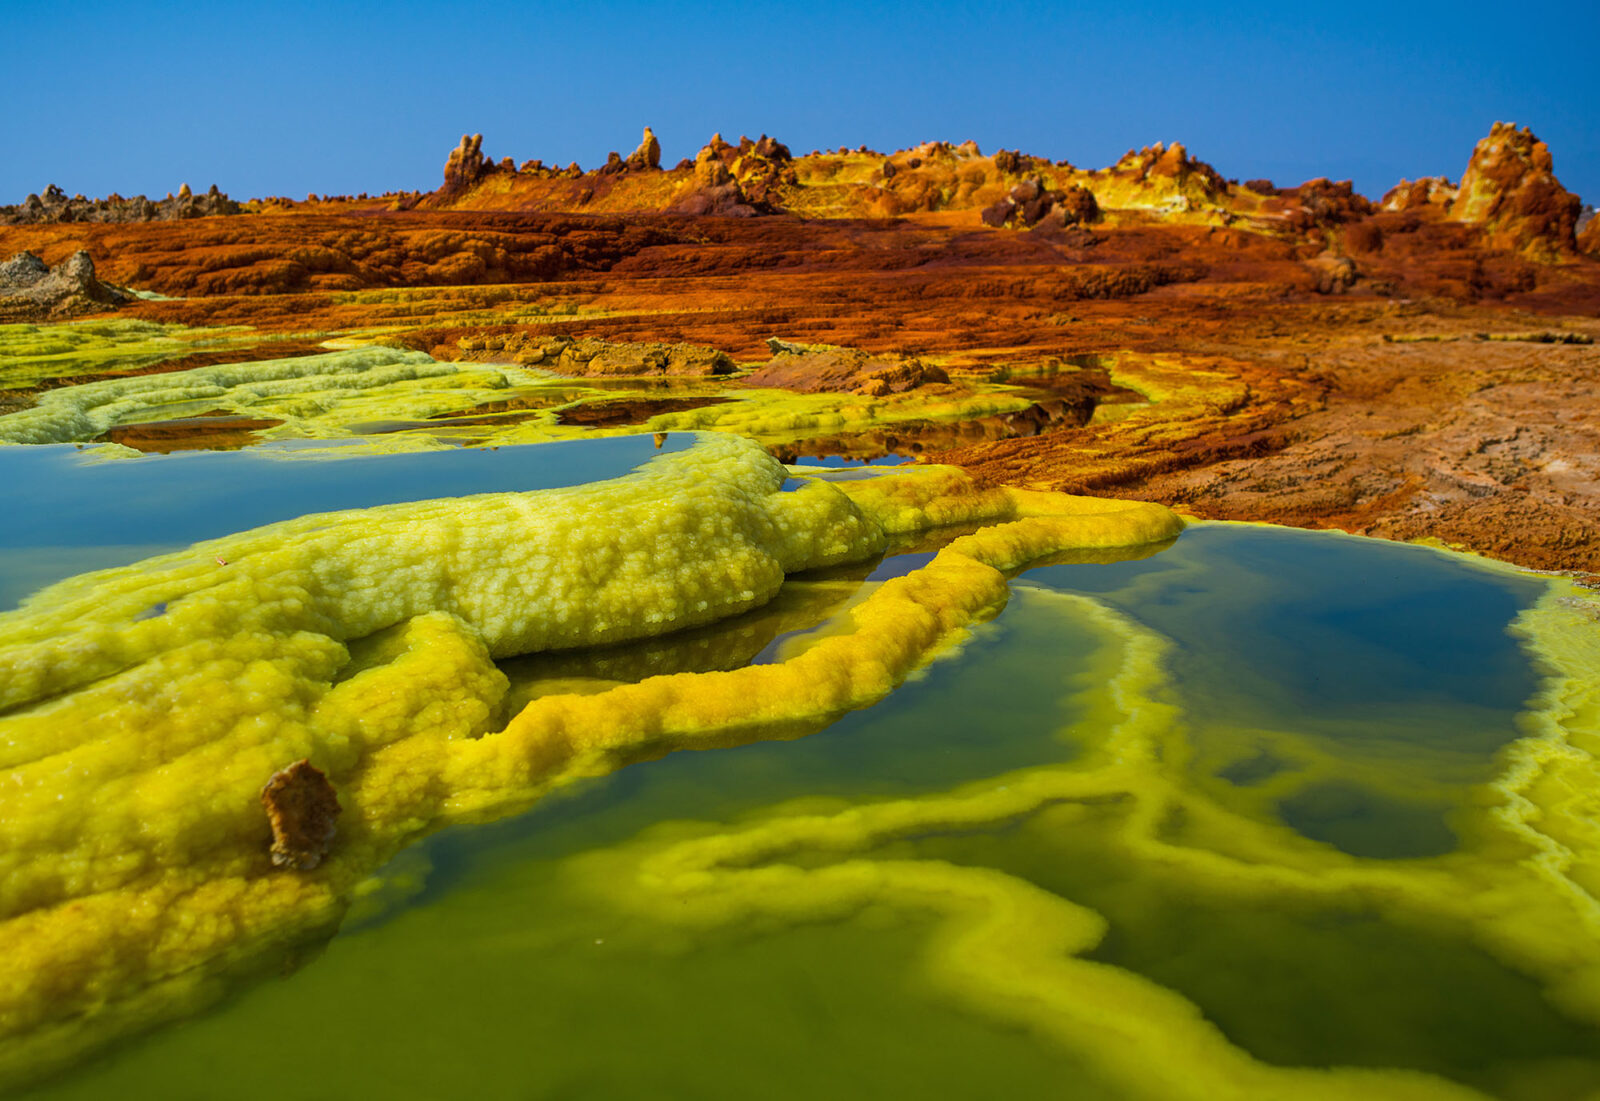 Can You Match These Natural Wonders to Their Locations? Danakil Desert depression, Ethiopia